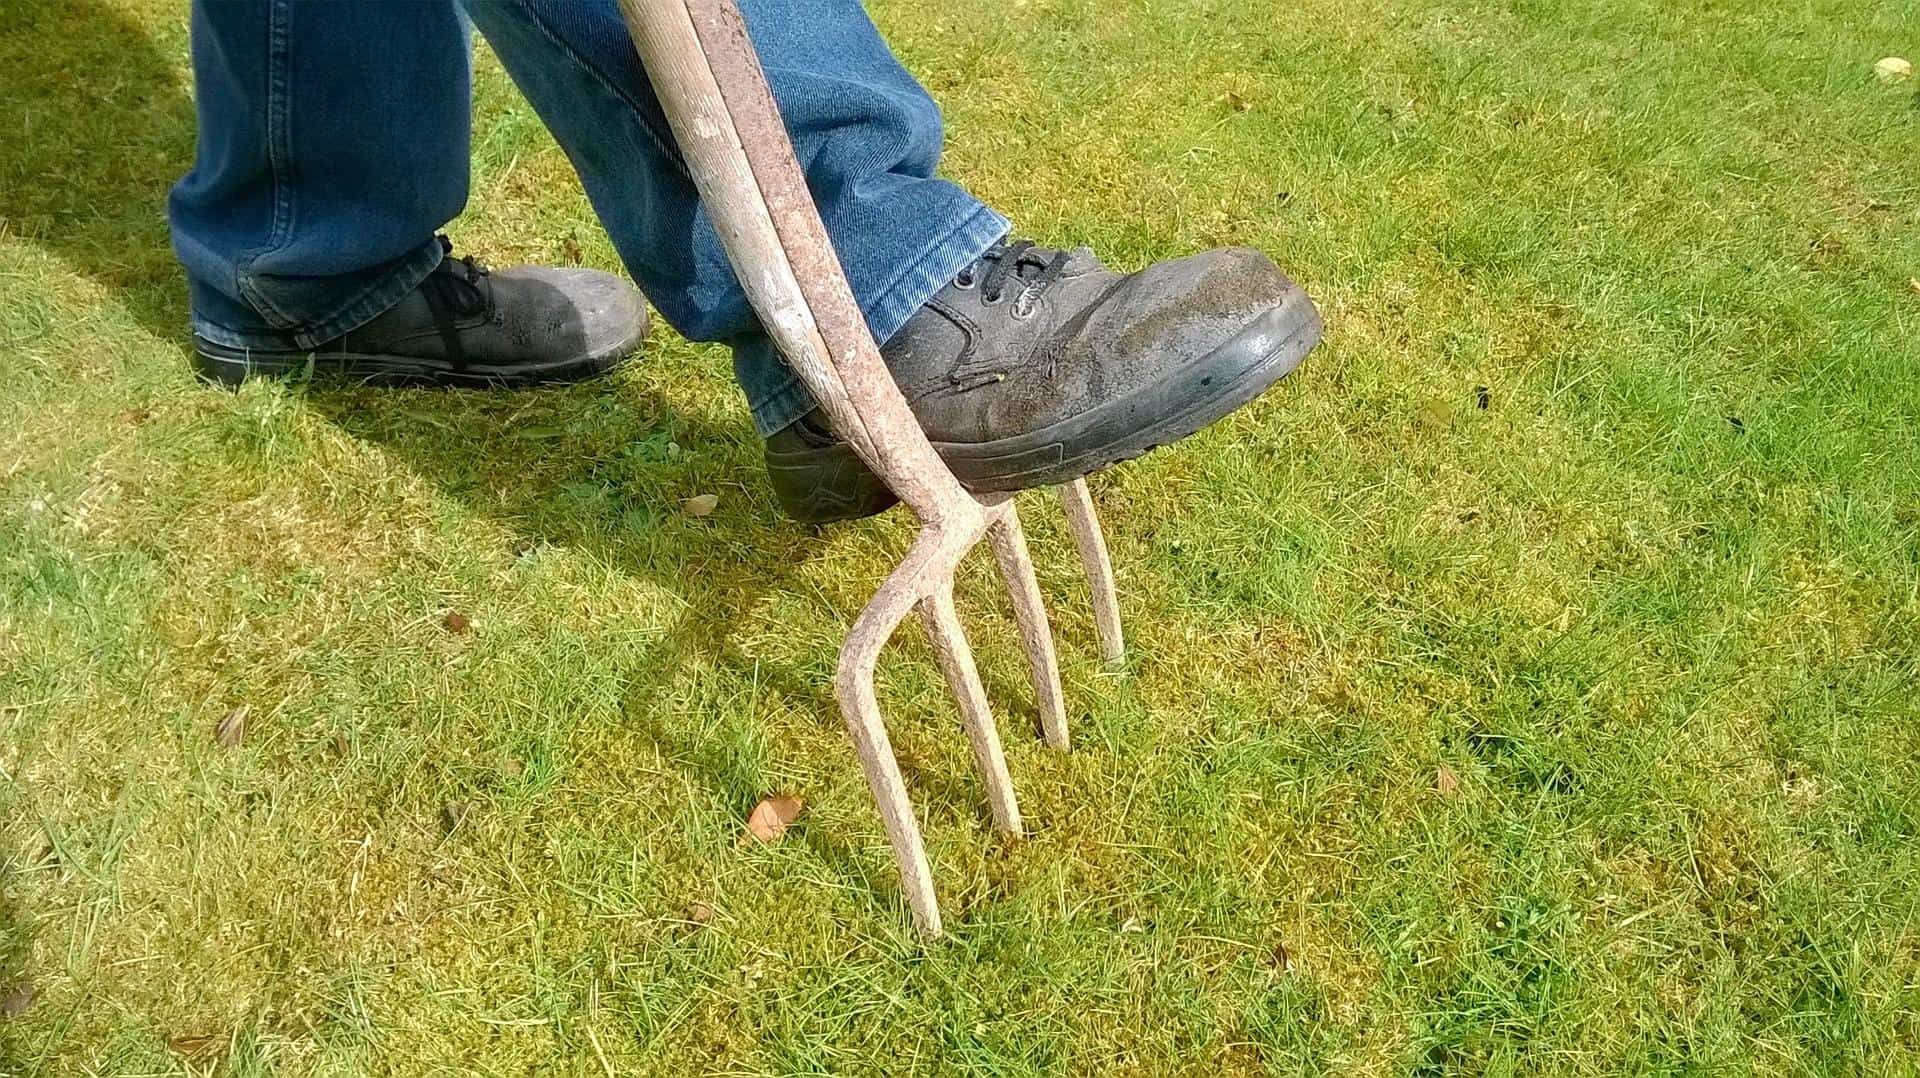 Aerating soil with pitchfork